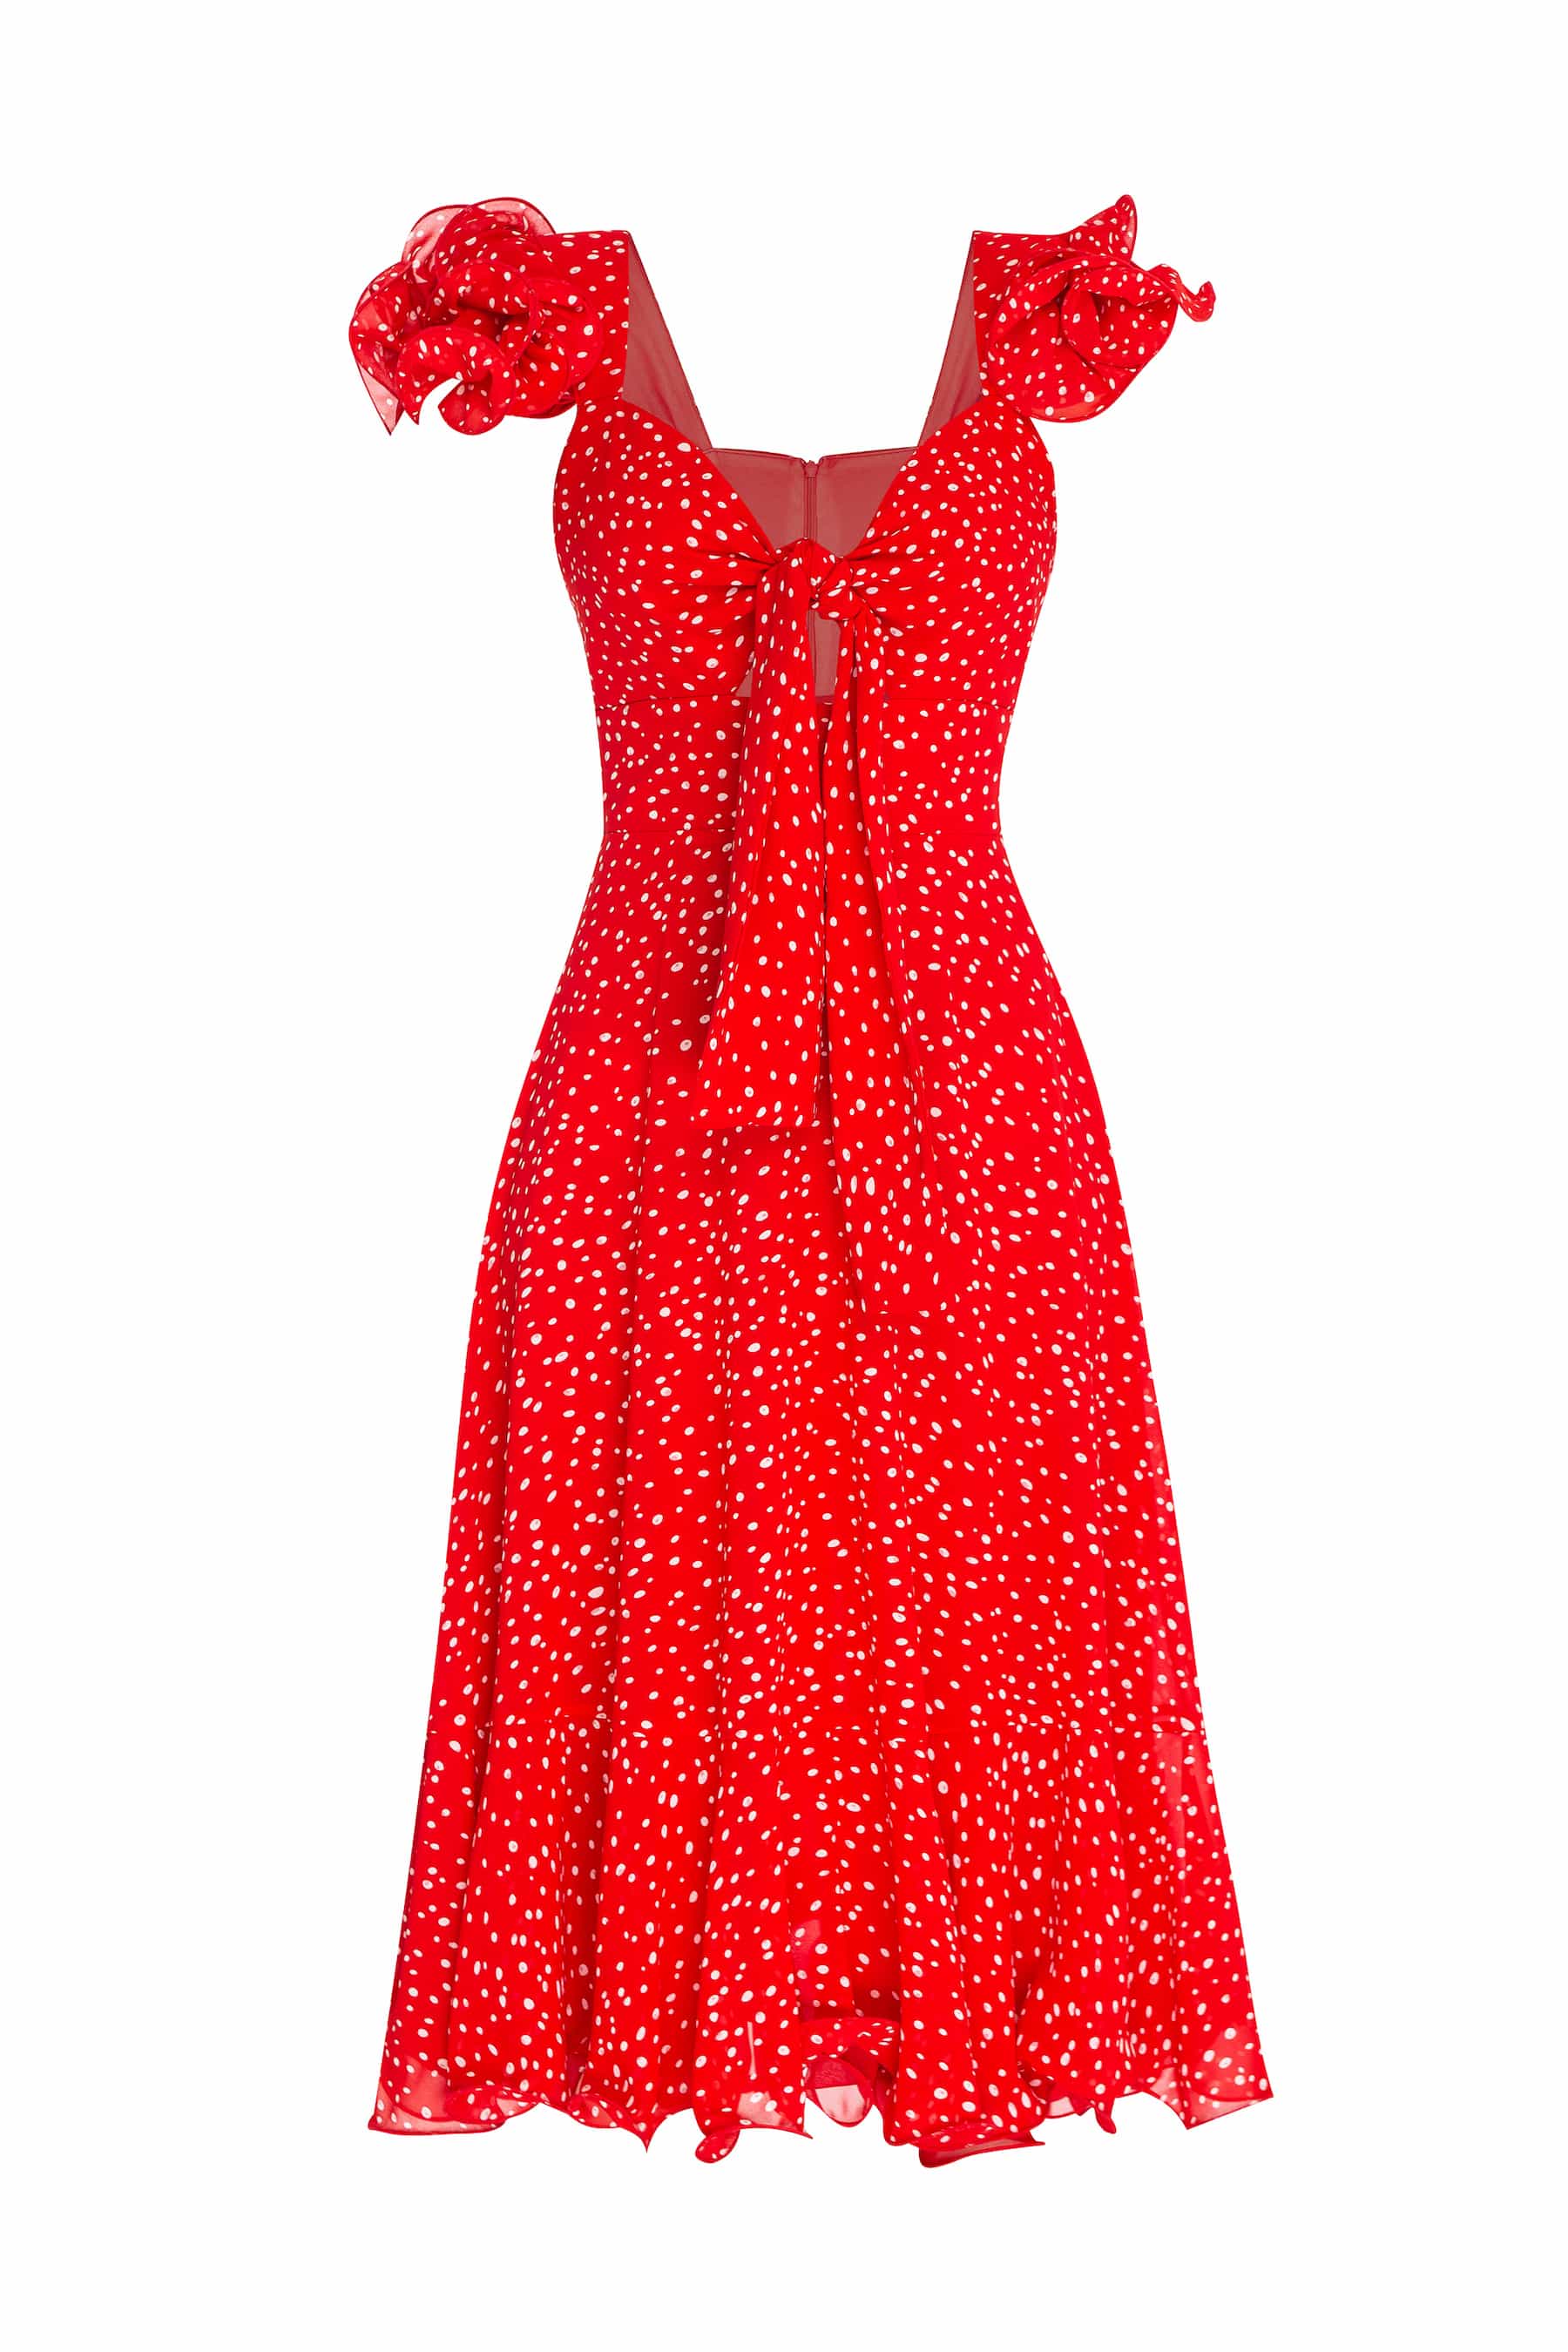 Red dress from chiffon with ruffle sleeves